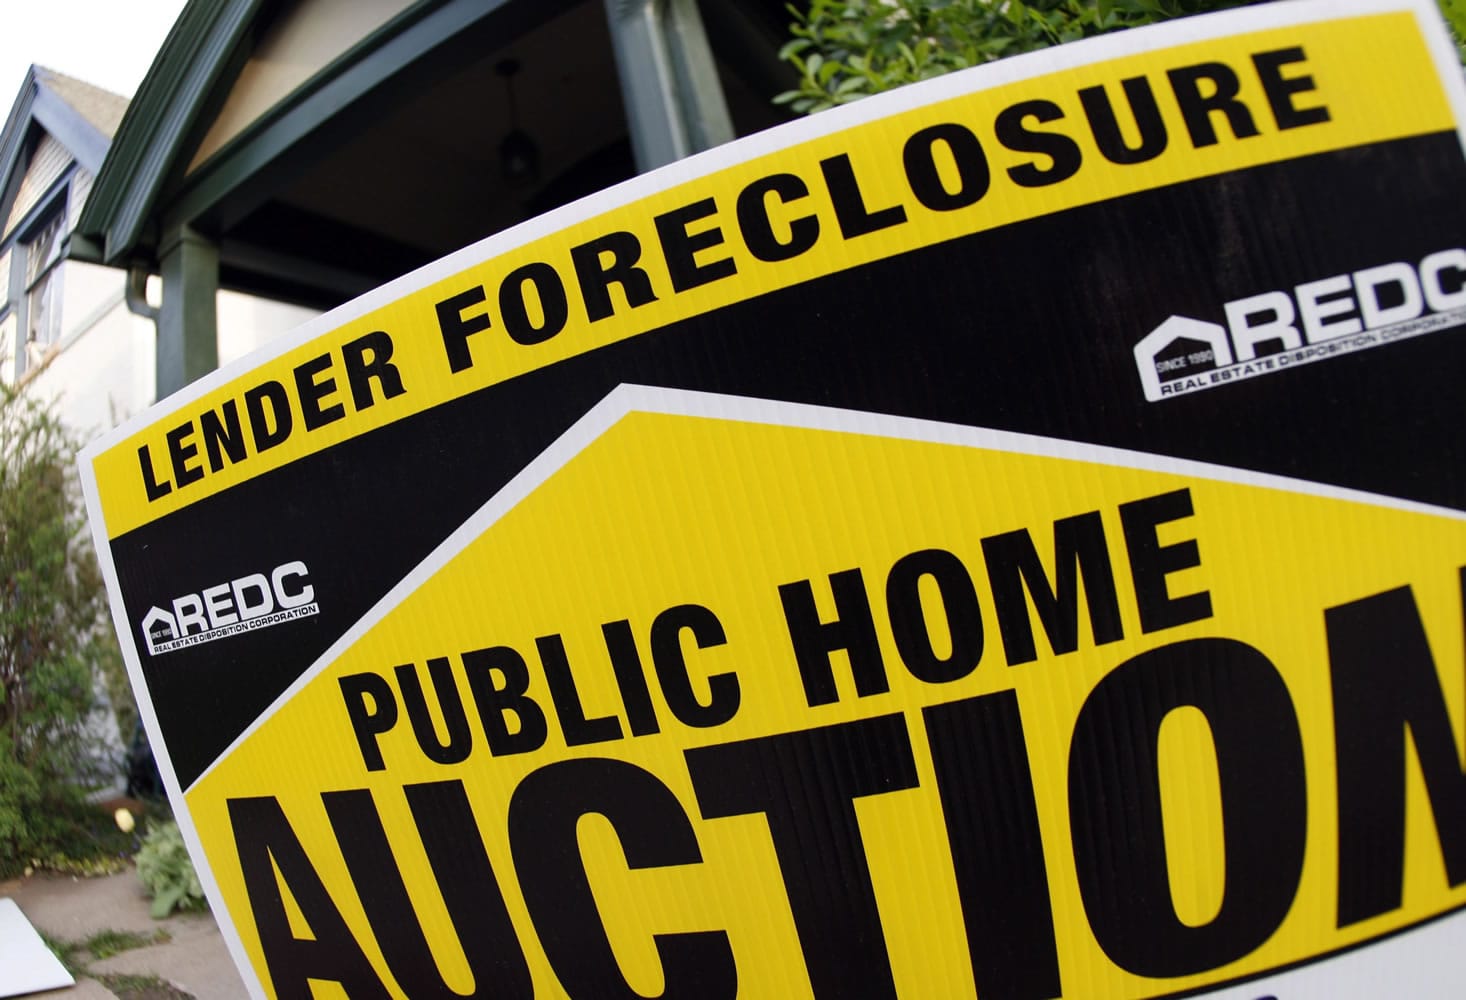 A report released Thursday showed the number of homes in foreclosure continued to decline in Clark County and across the state in October, compared with the same month last year.